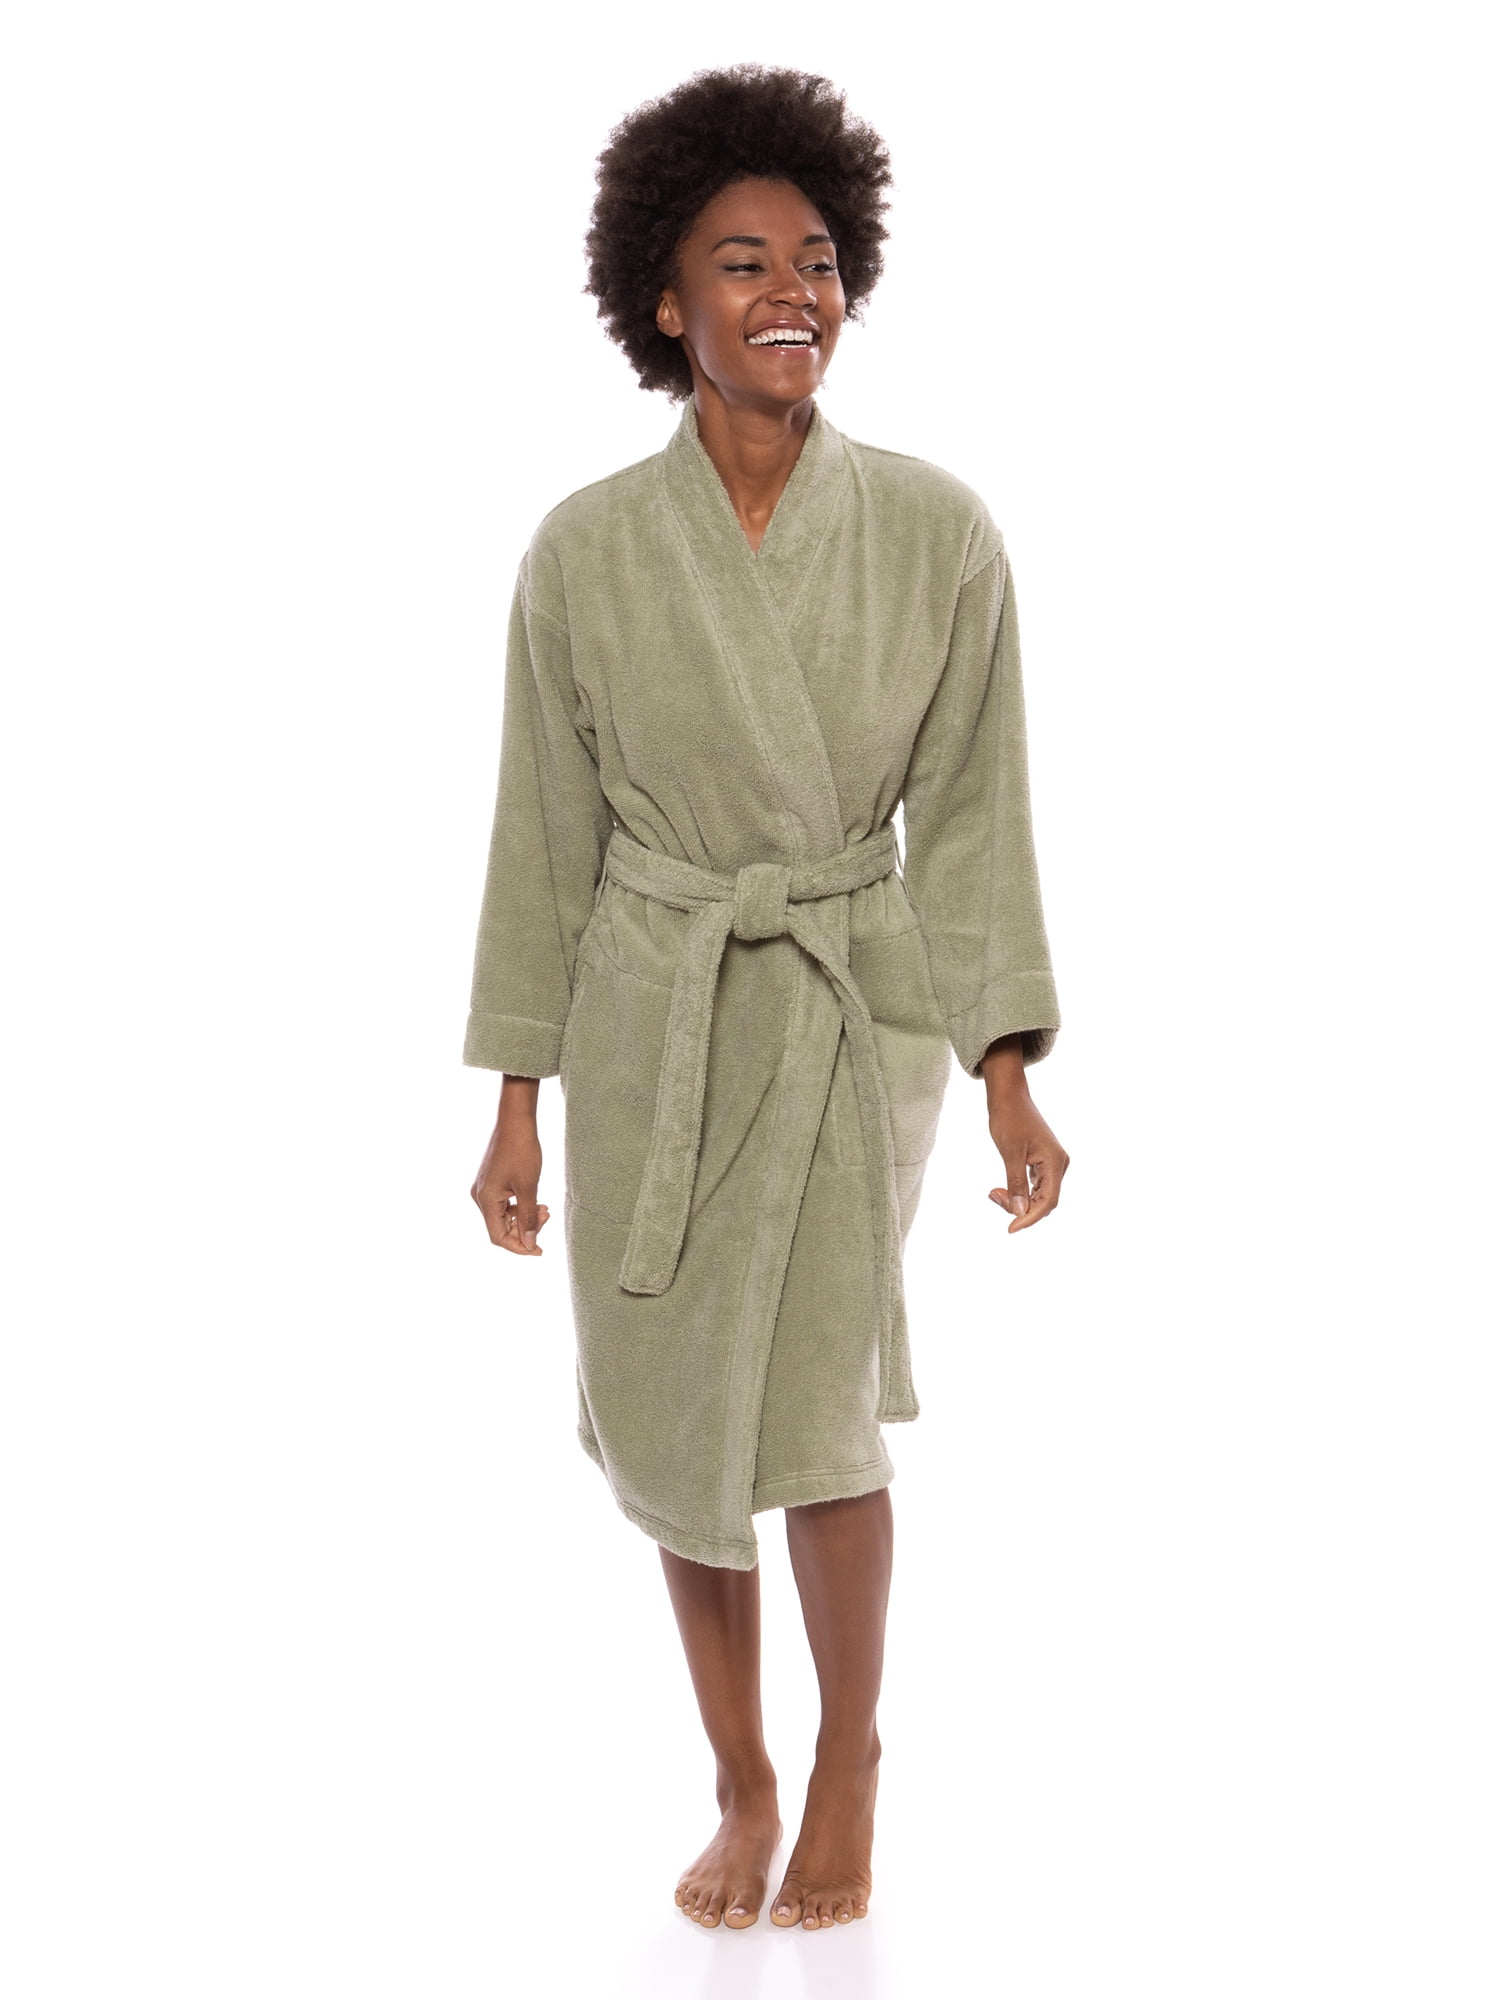 Texere Women S Organic Cotton Terry Robe Slim Fit Bathrobe For Her Megeve